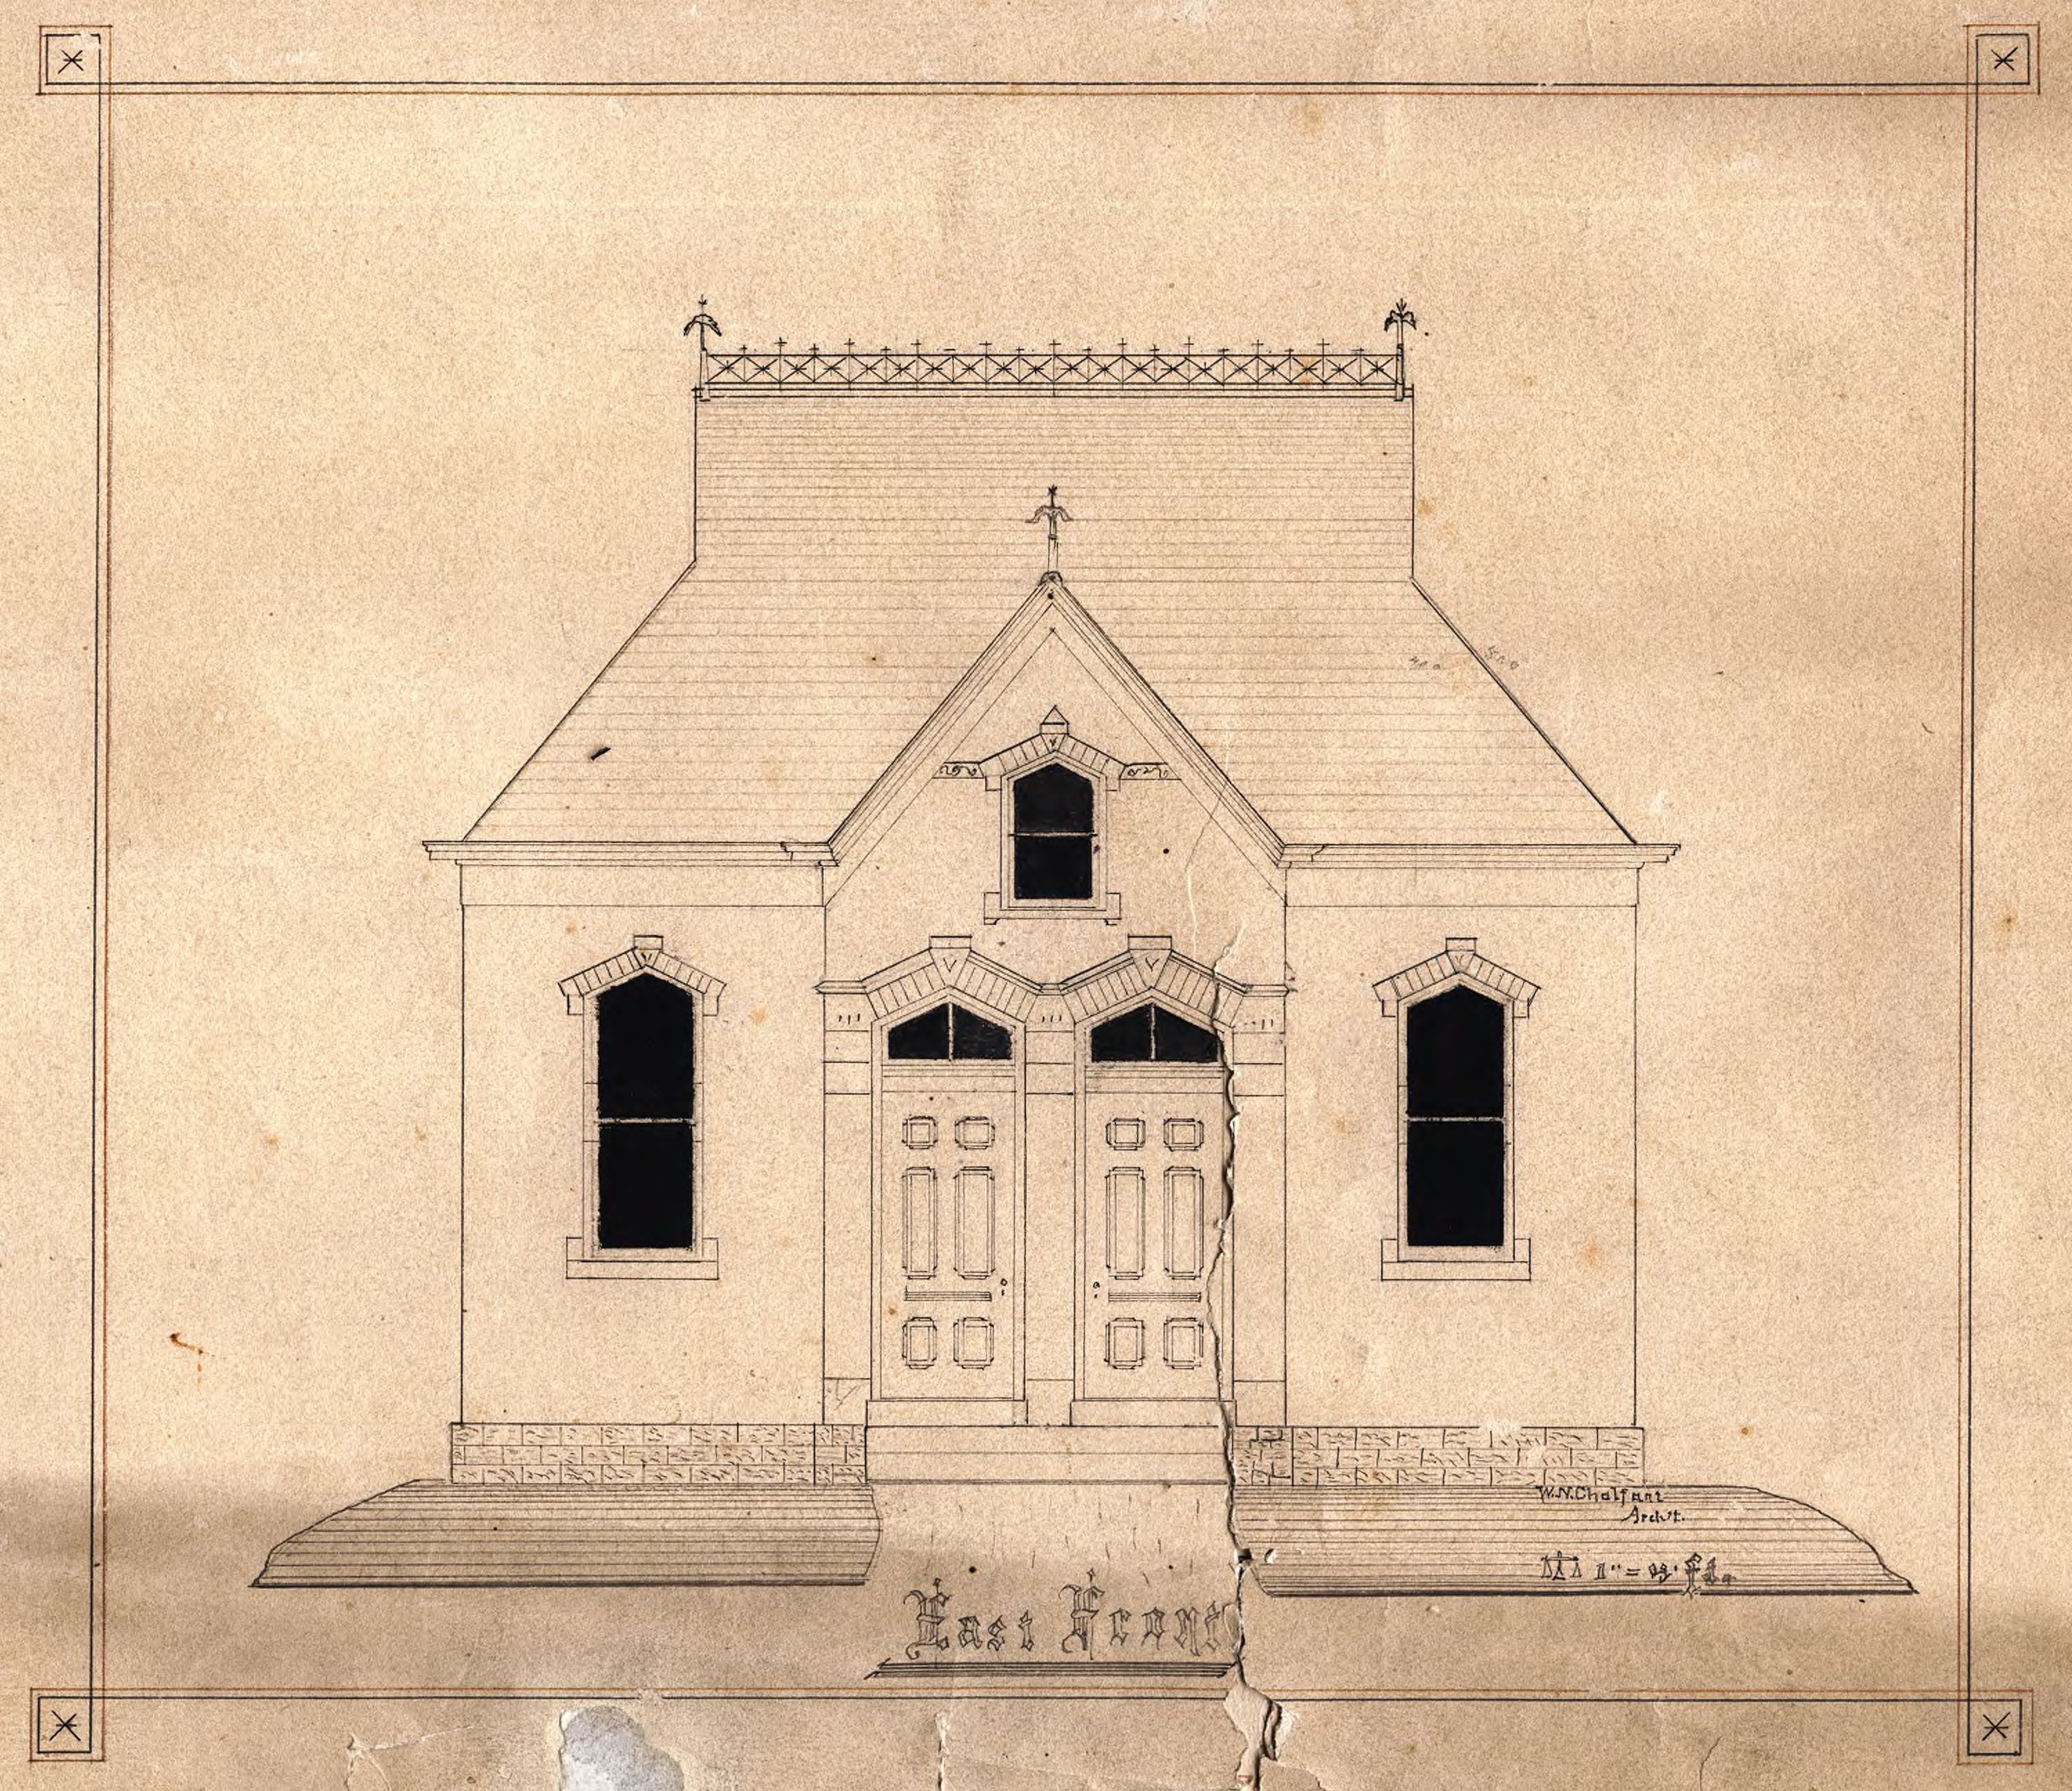 Water Closet East Elevation, building sketch by W.N. Chalfant